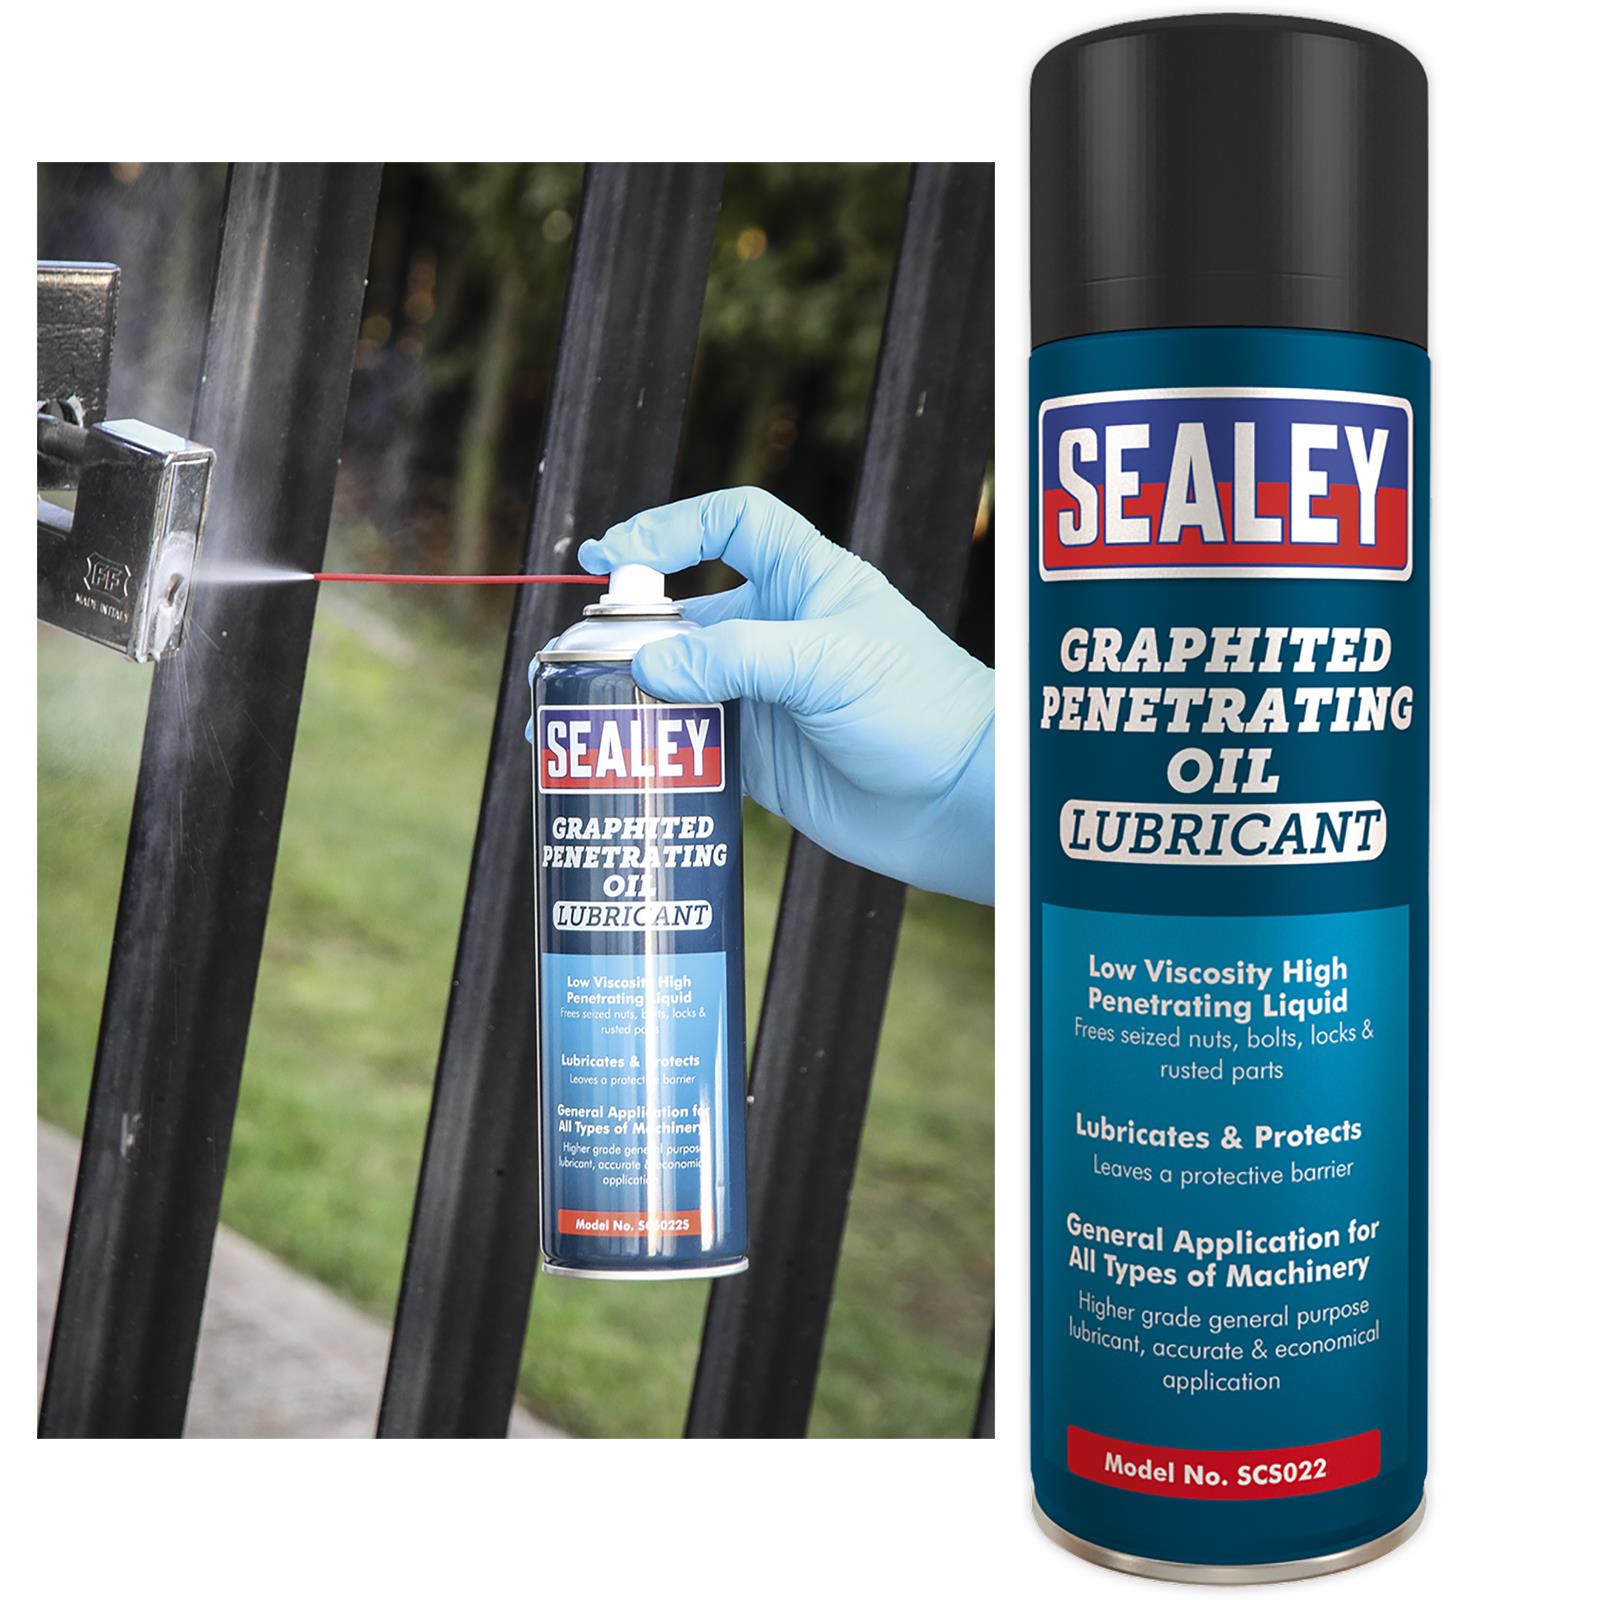 Sealey 500ml Graphited Penetrating Oil Lubricant Spray